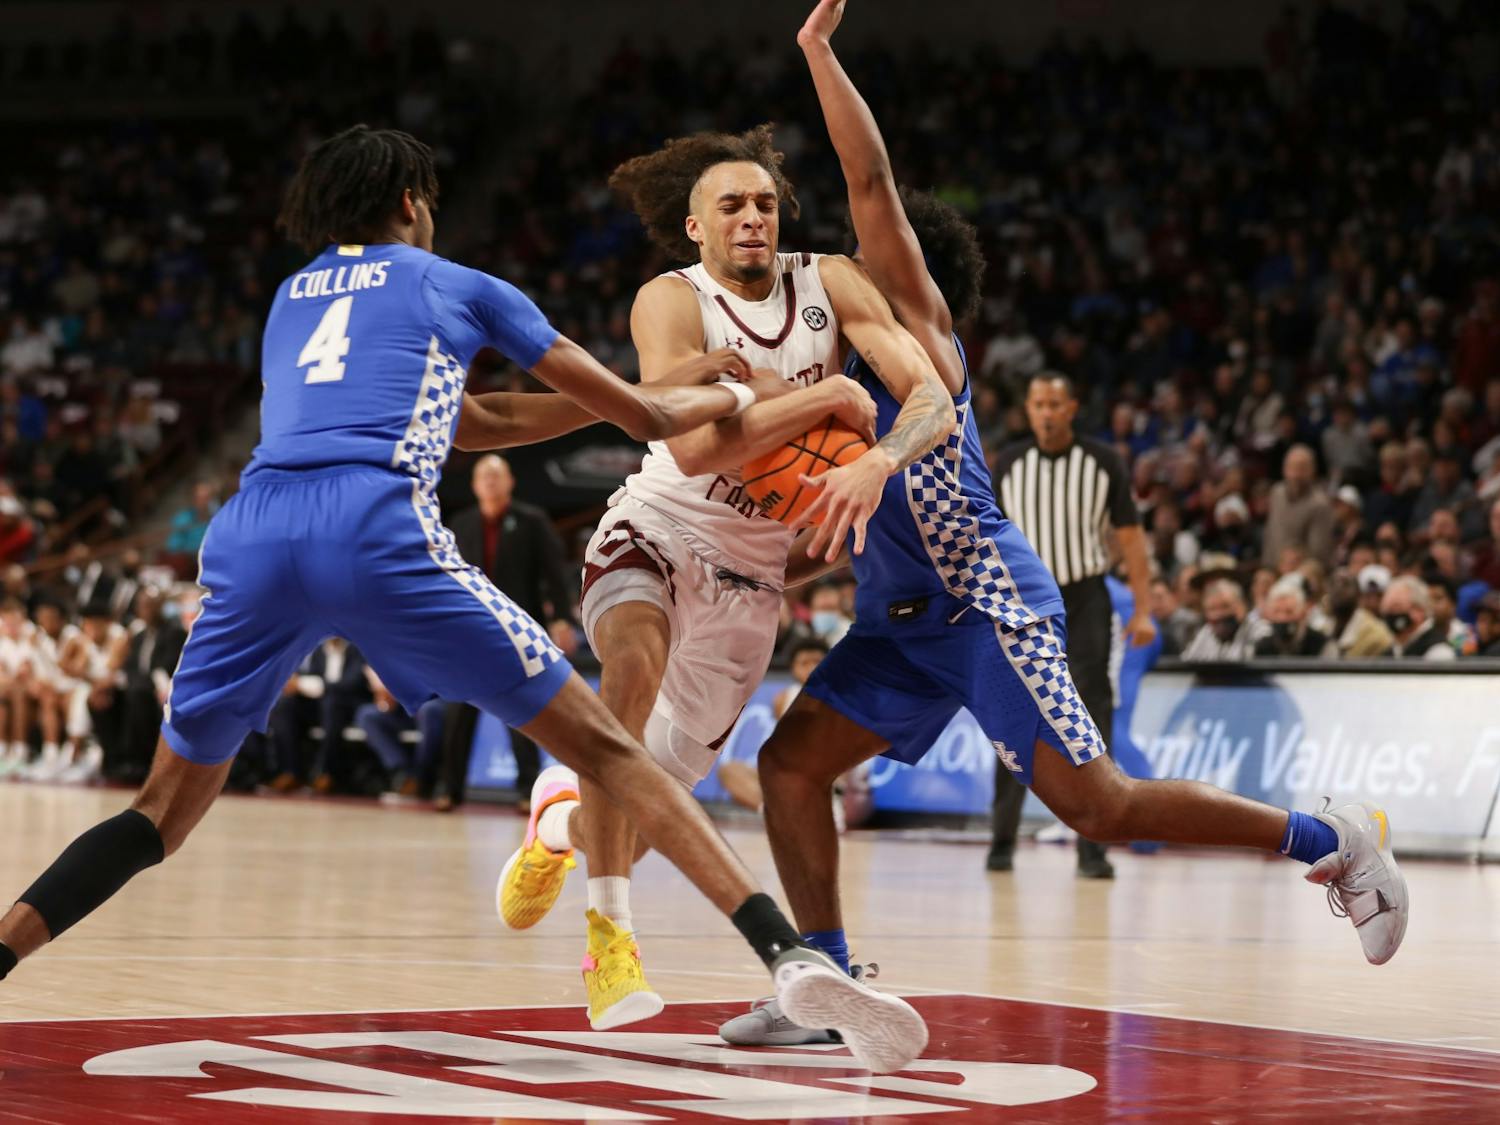 Freshman guard Devin Carter tries to maintain possession amongst the Kentucky defense on Feb. 8, 2022 at Colonial Life Arena. South Carolina lost to Kentucky 86-76.